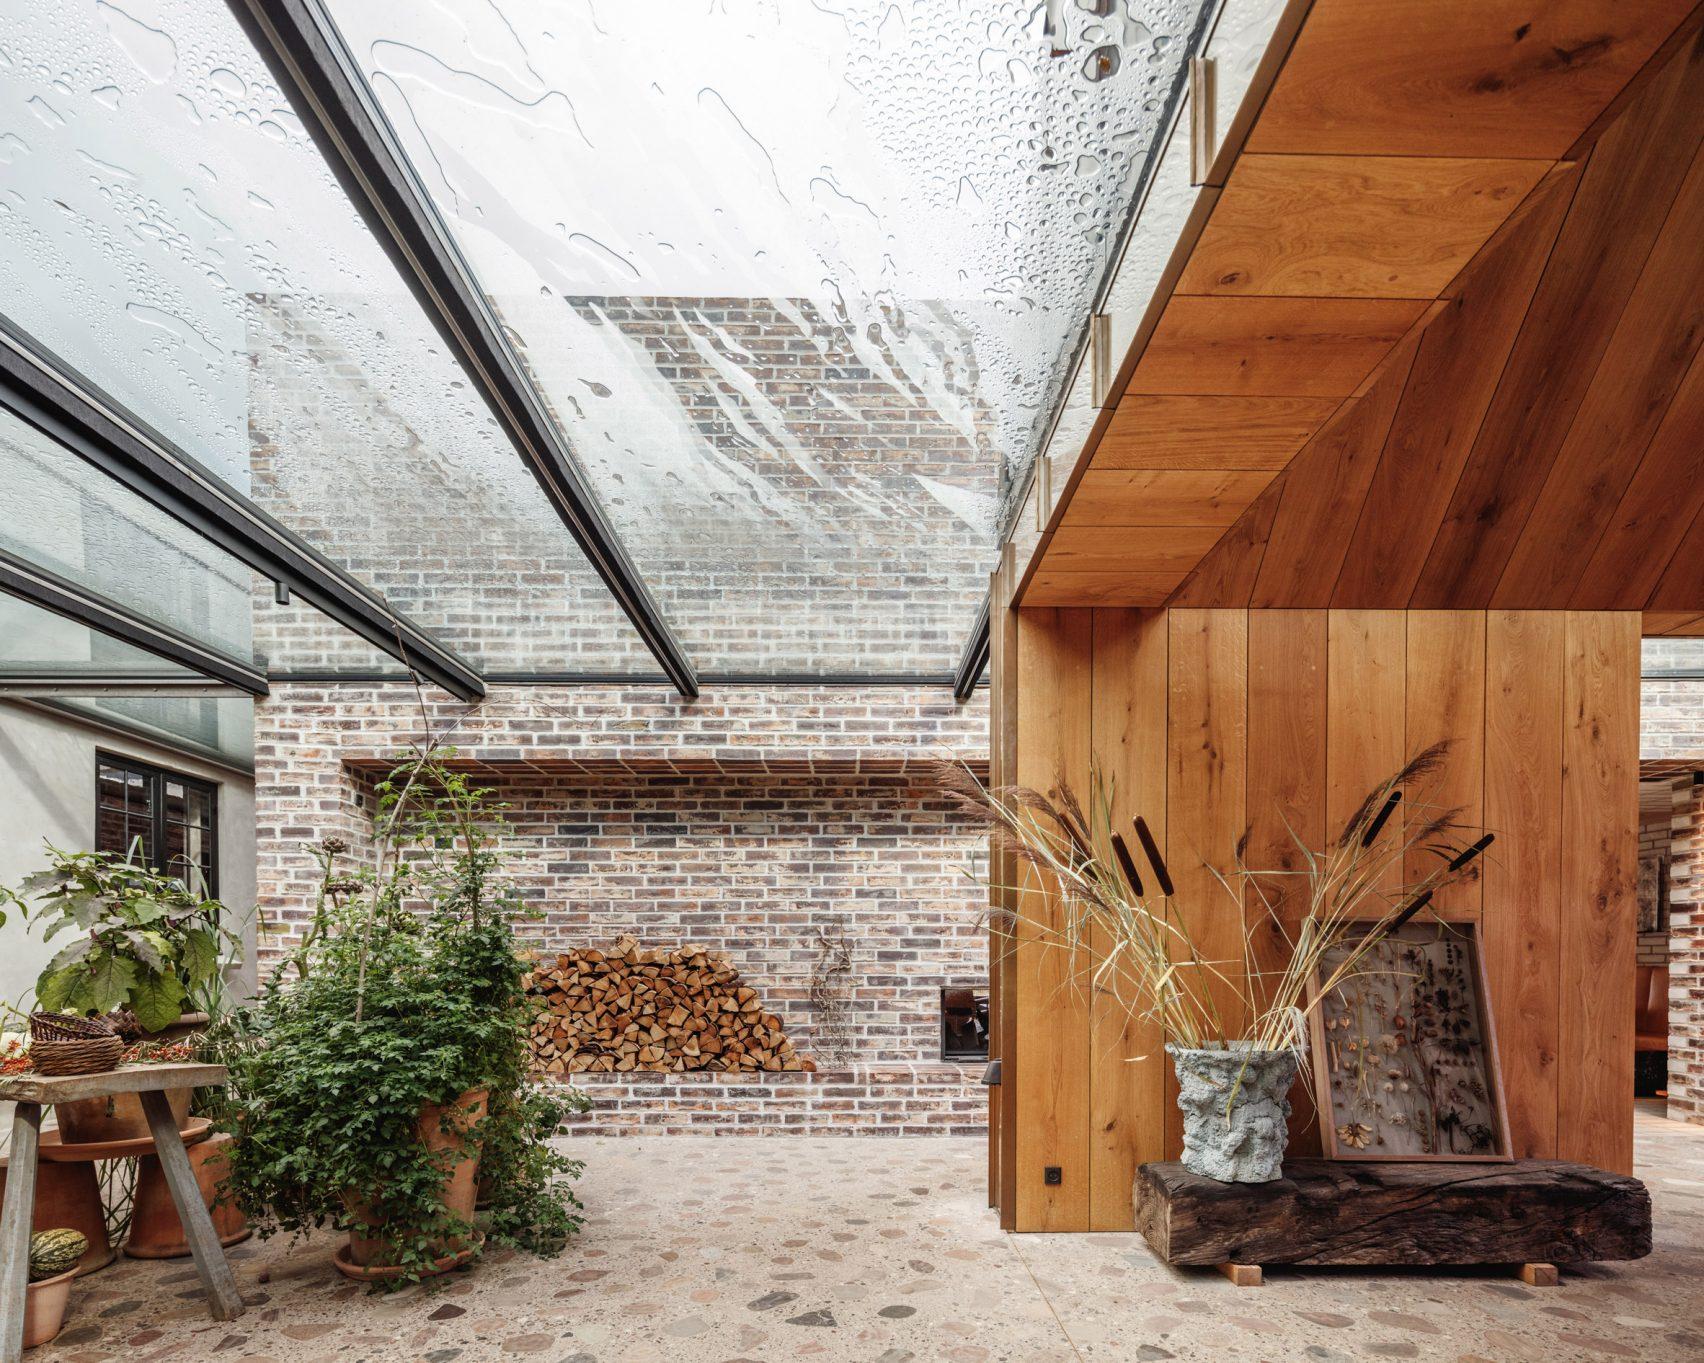 Sunlight streams through the glass roof into the brick and wood-decked interiors